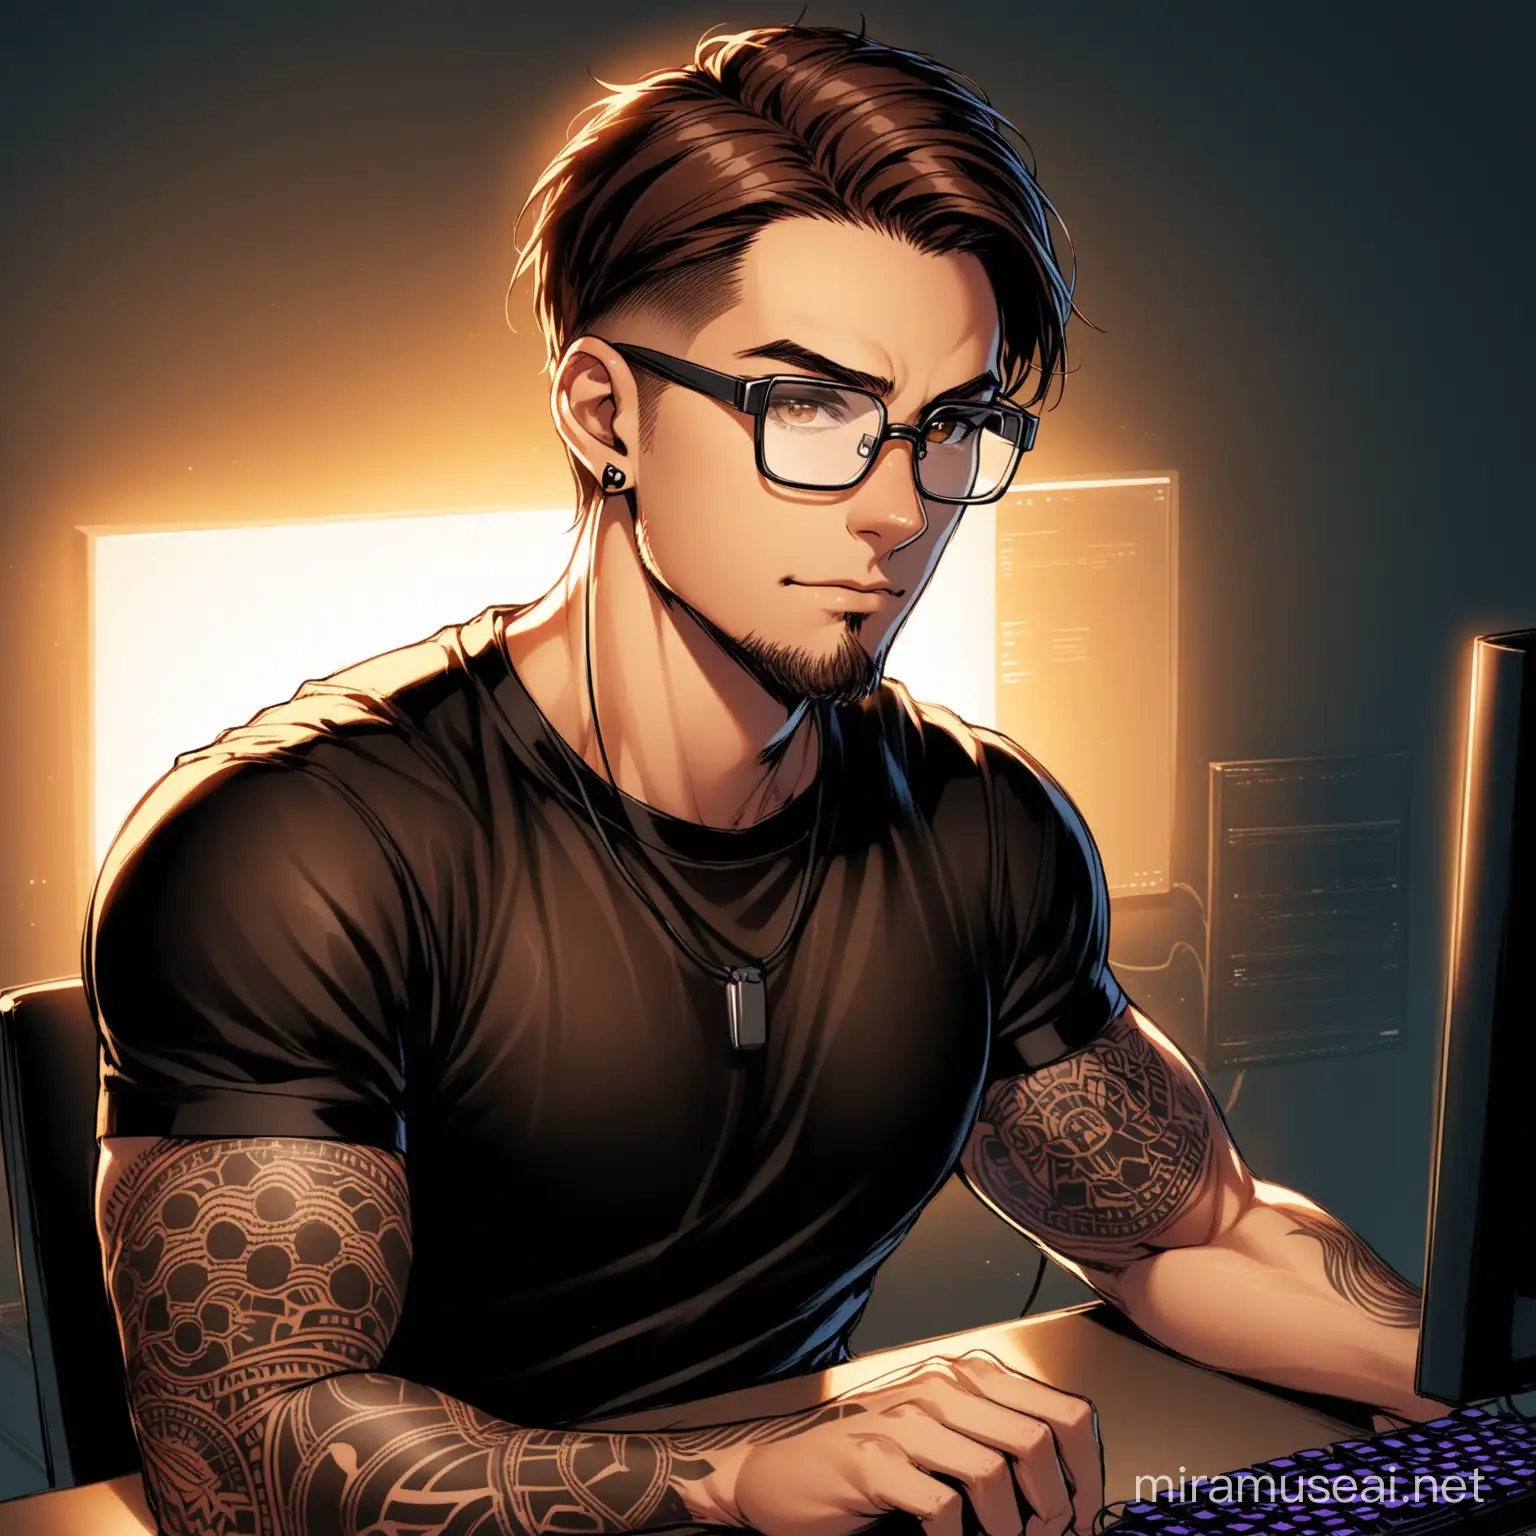 Nerdy Mid30s Guy with Square Glasses Working on Computer